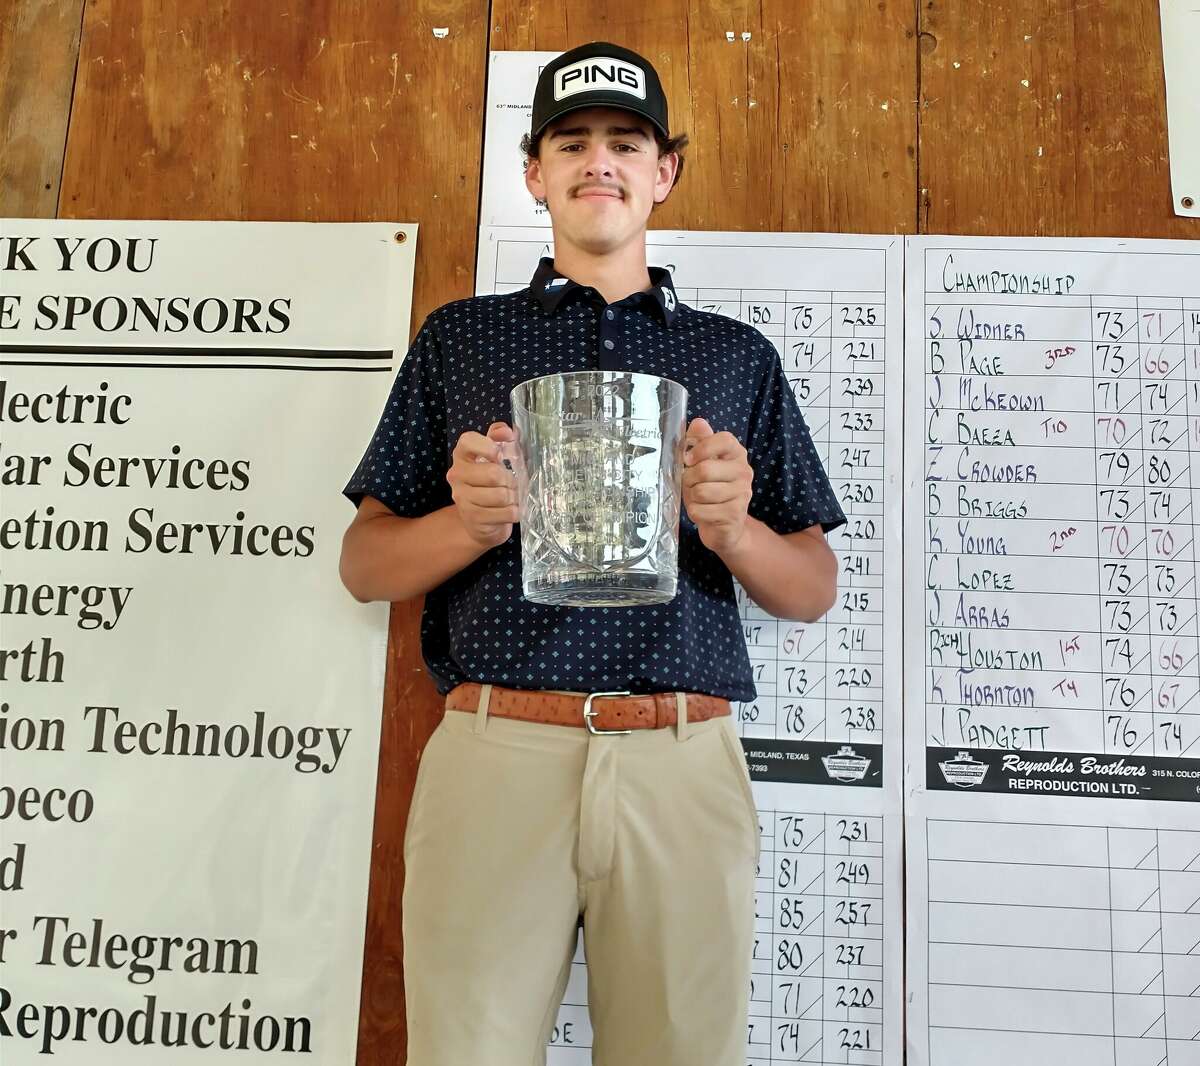 Richman Houston poses with the glass trophy after winning the Midland Men's City Championship on Sunday at Hogan Park Golf Course.